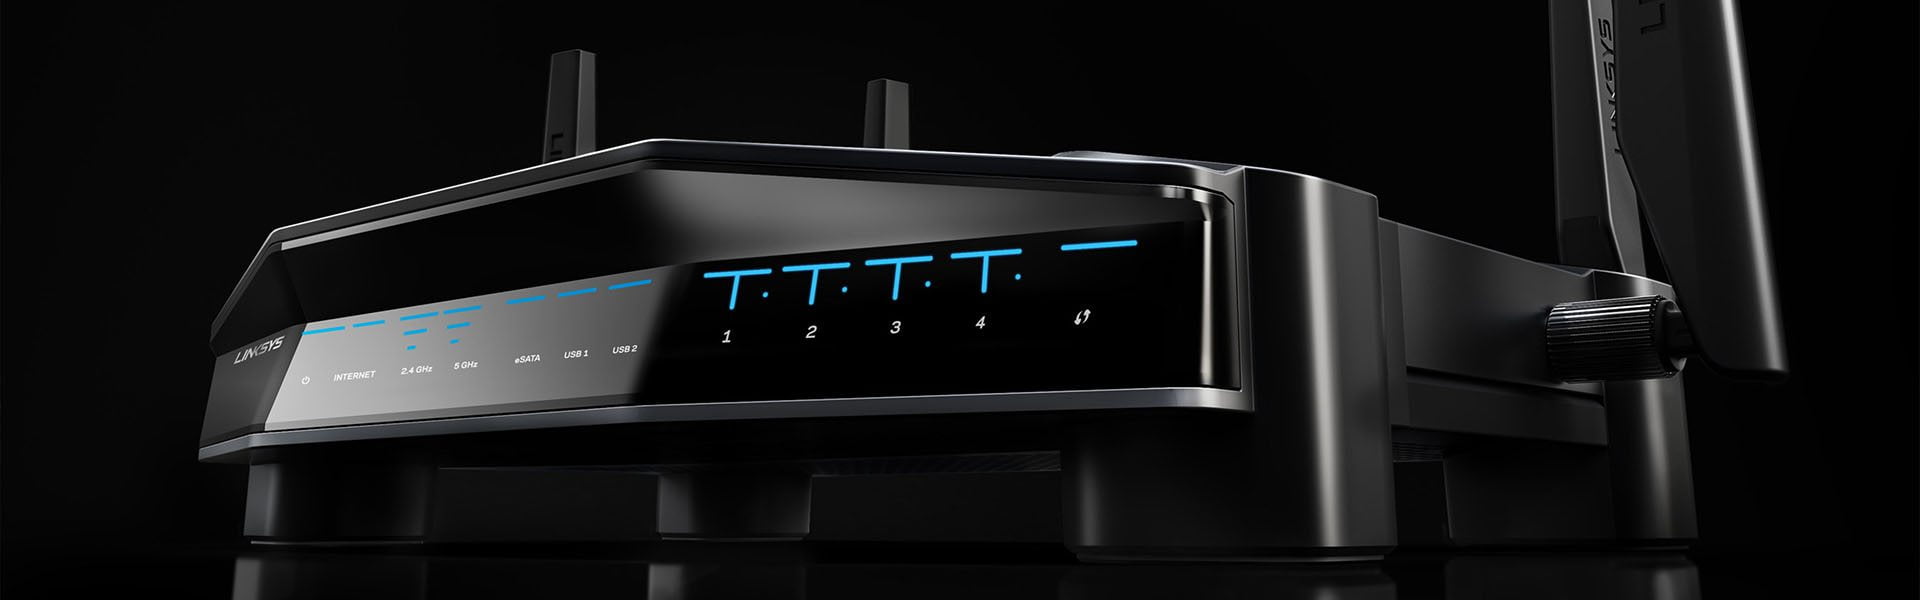 Killer Prioritization Engine Introduced on the New Linksys WRT Gaming Router 9